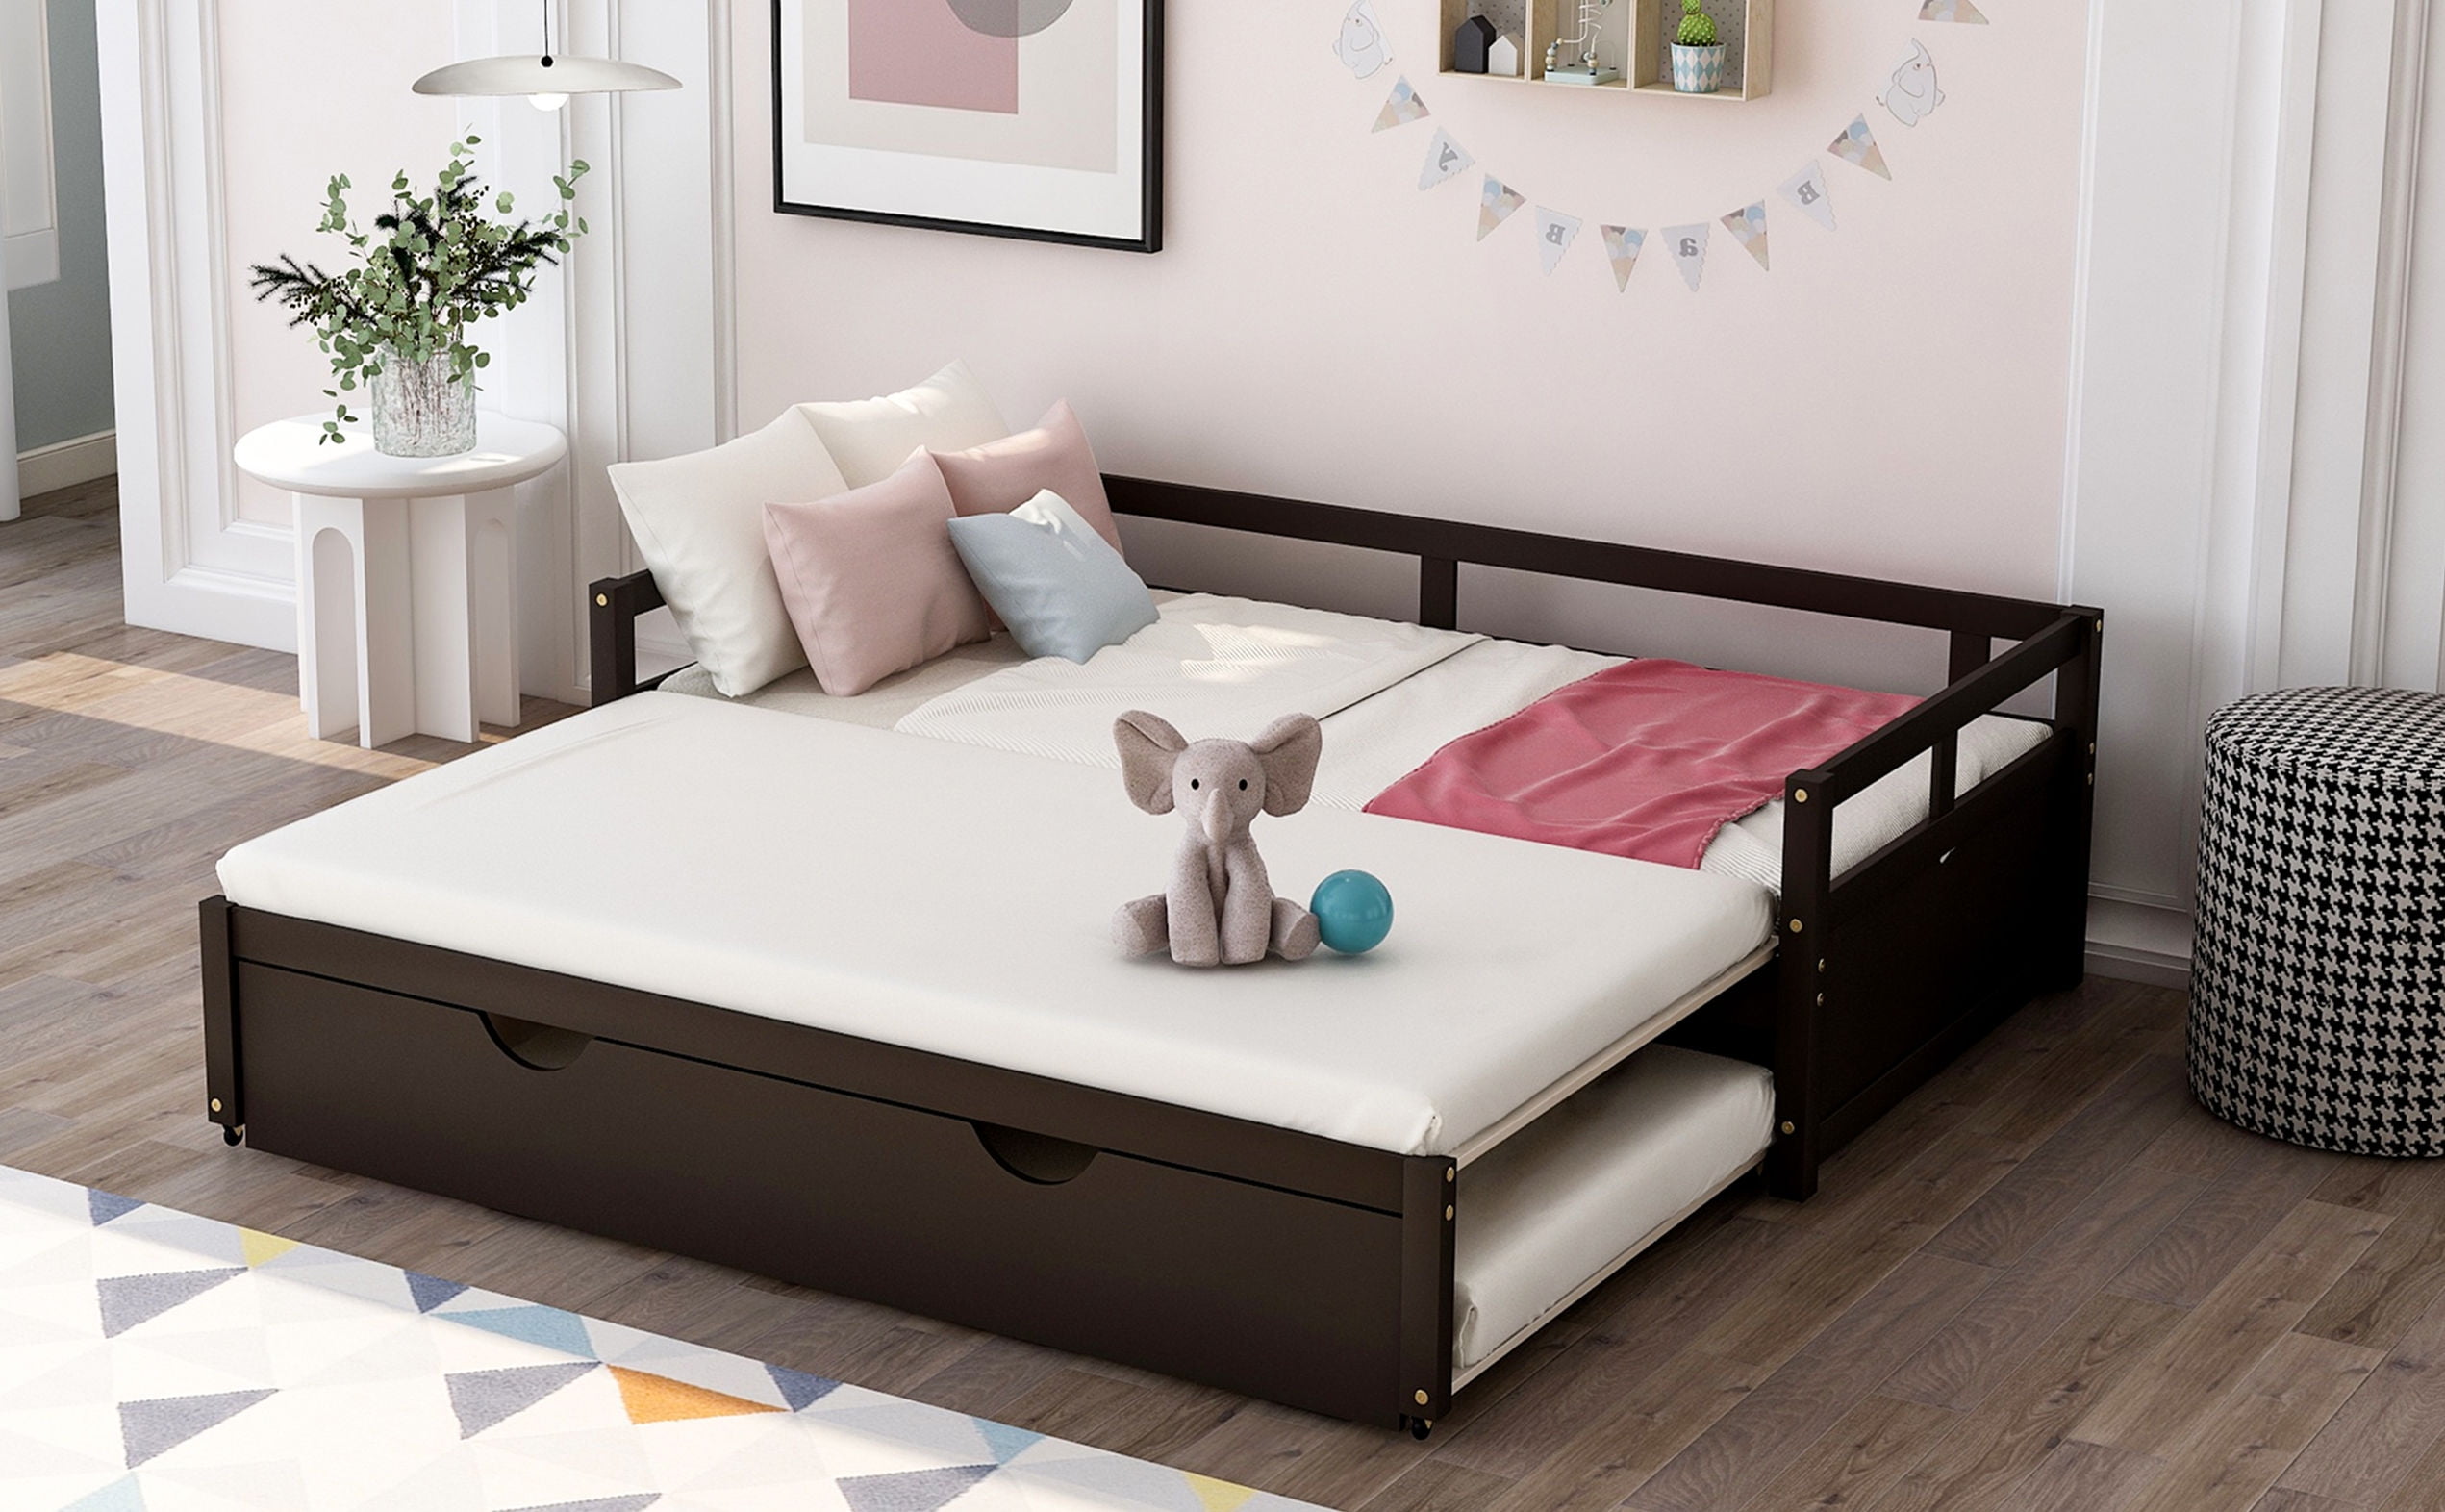 sofa bed for kids size